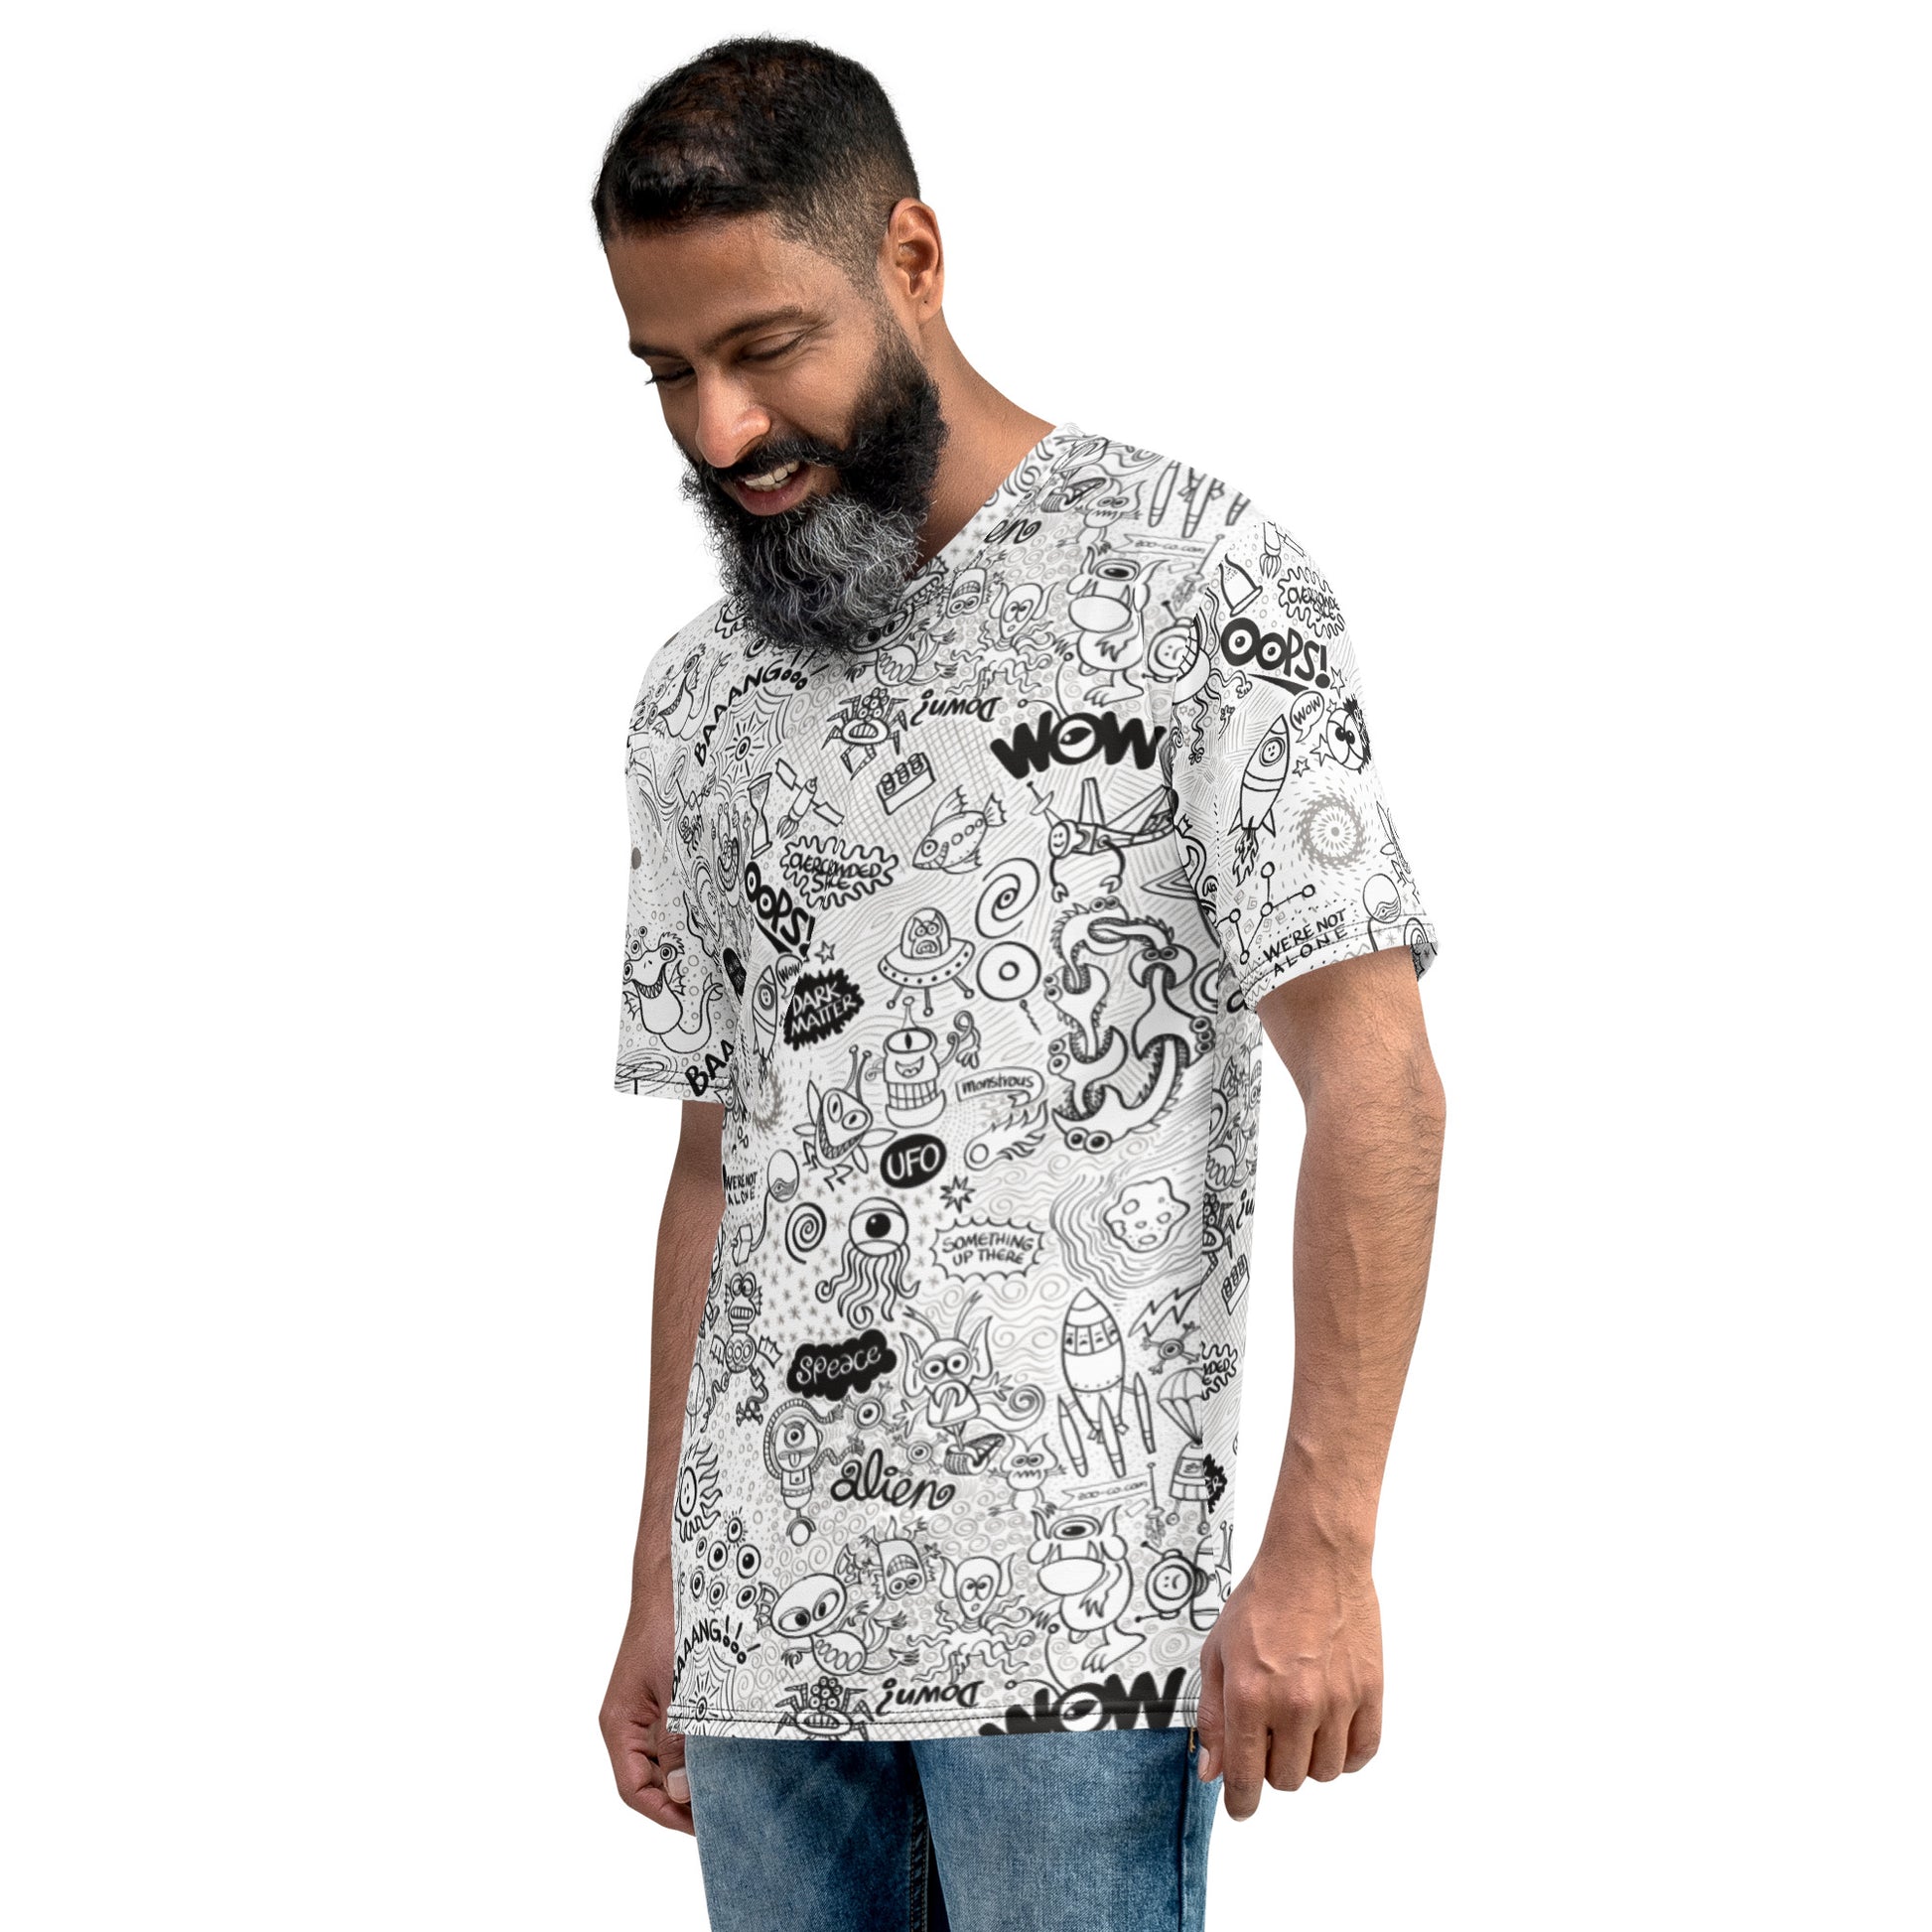 Celebrating the most comprehensive Doodle Art of the Universe ever created Men's t-shirt. Side view